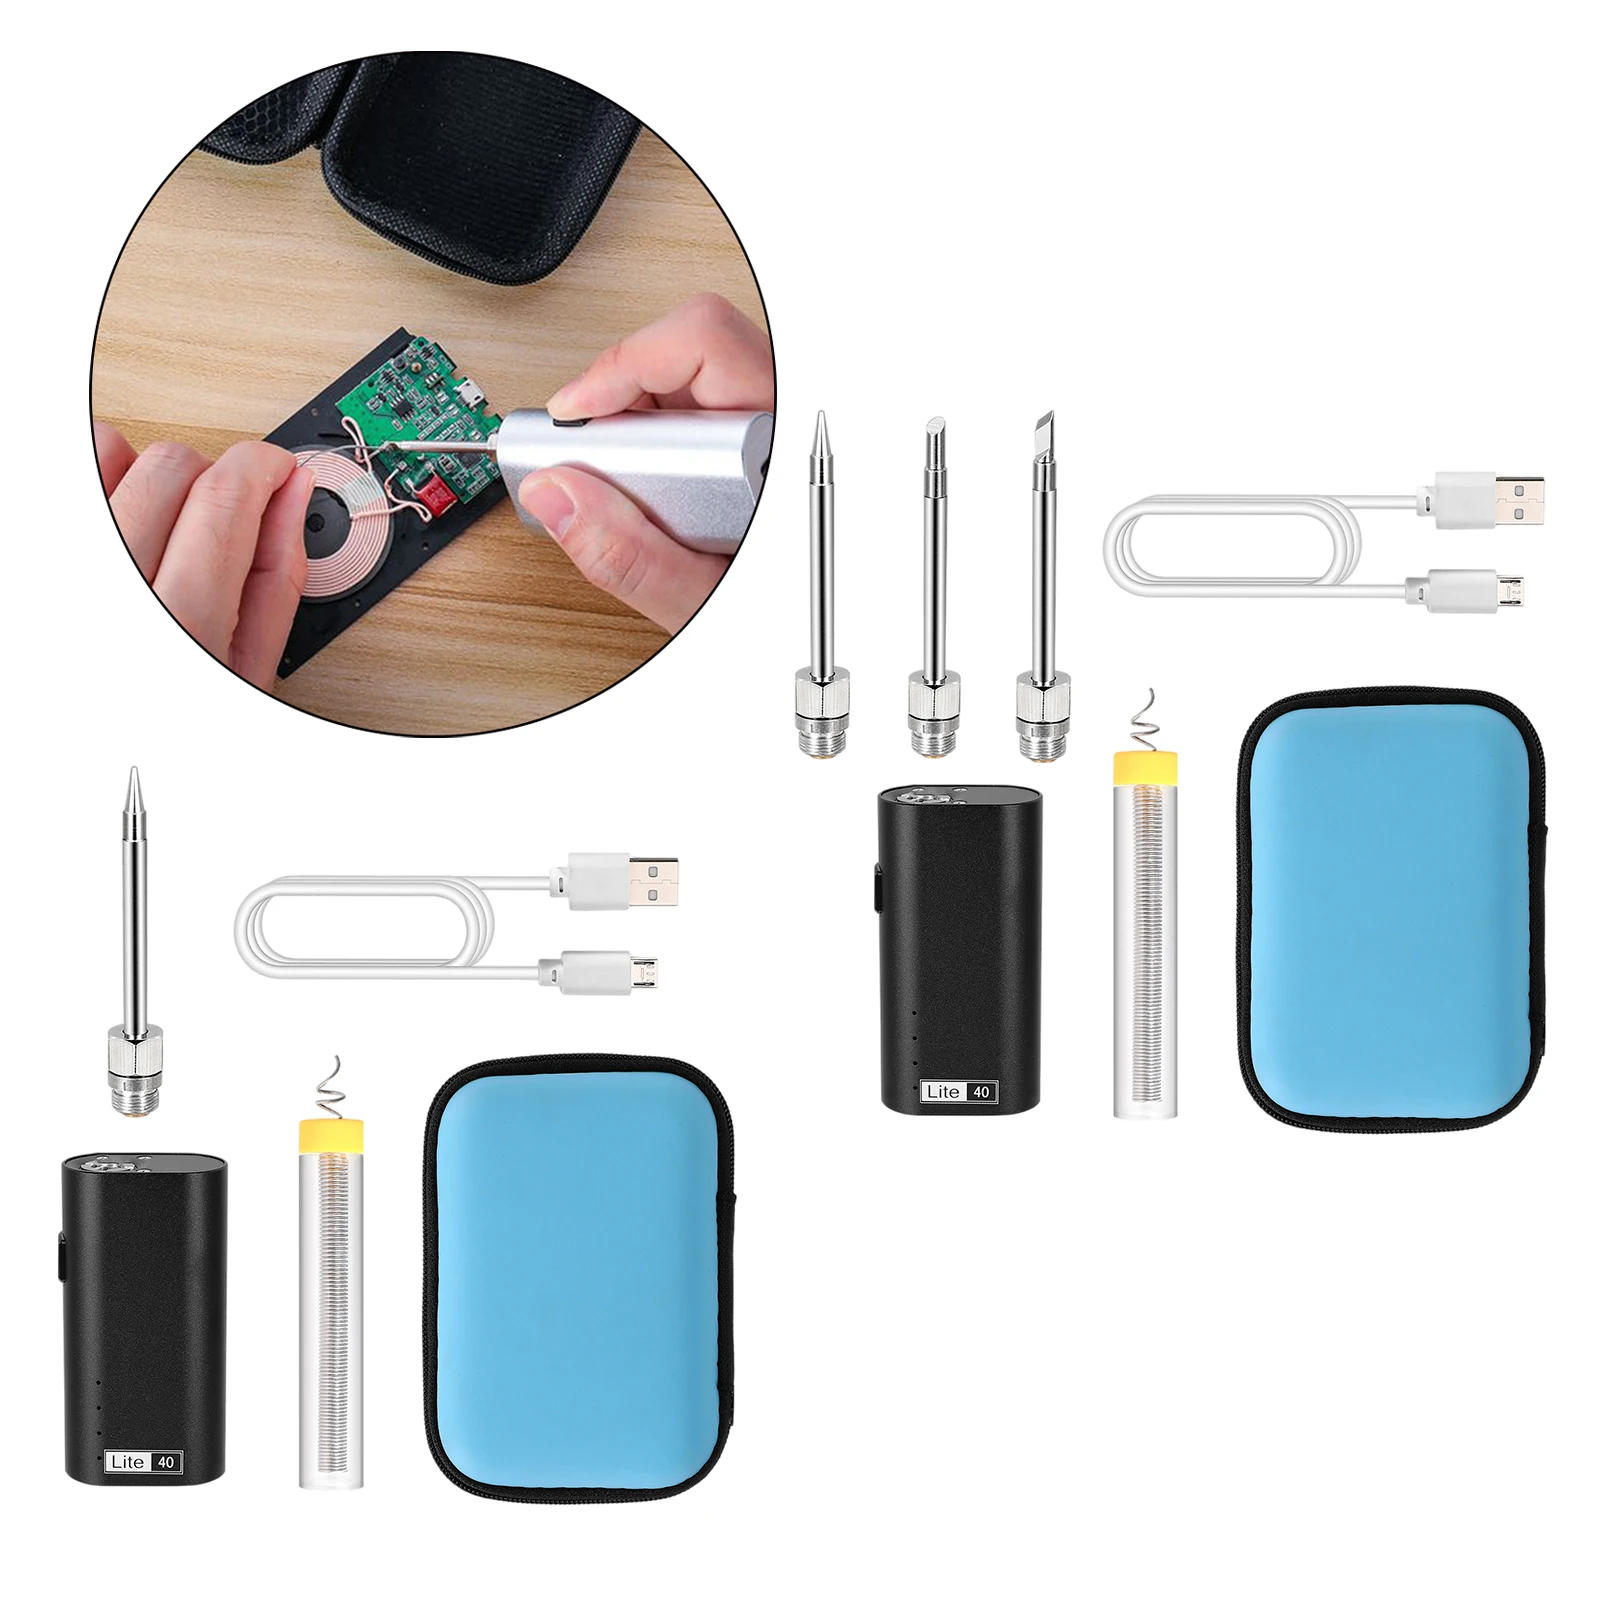 Wireless Soldering Iron Welding Tool USB Soldering Iron for RC Toy